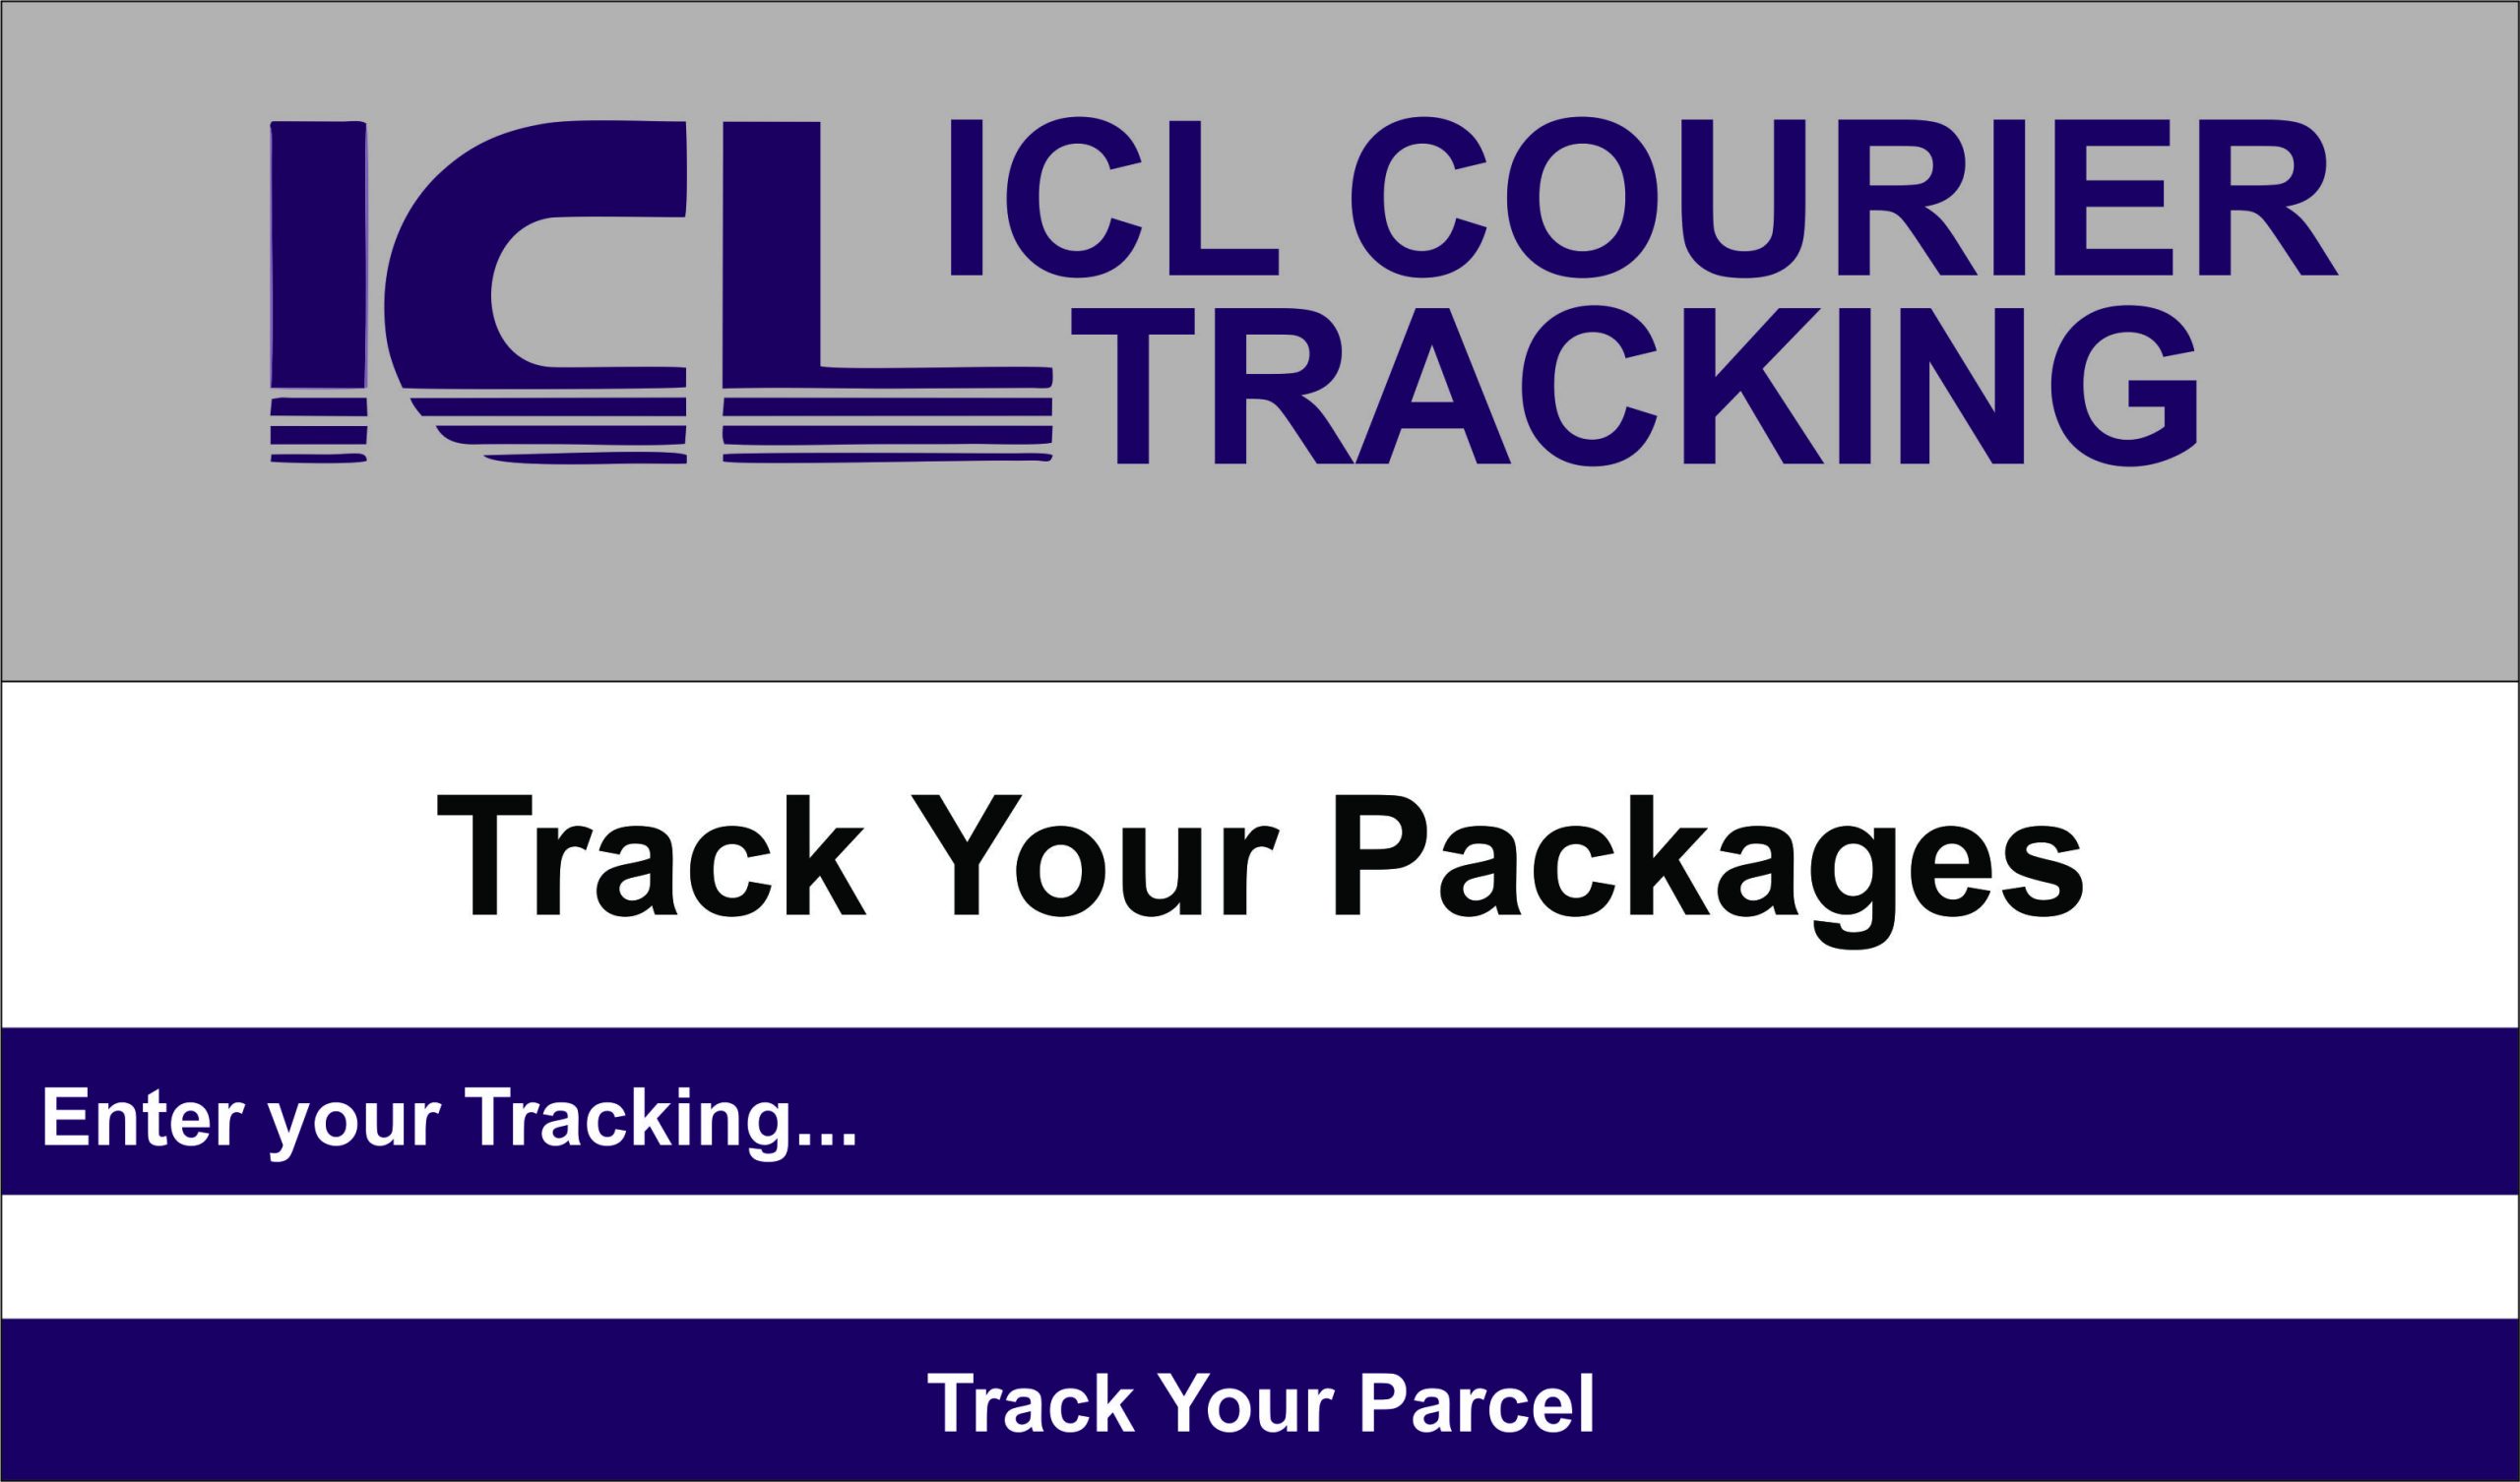 Parcel track your